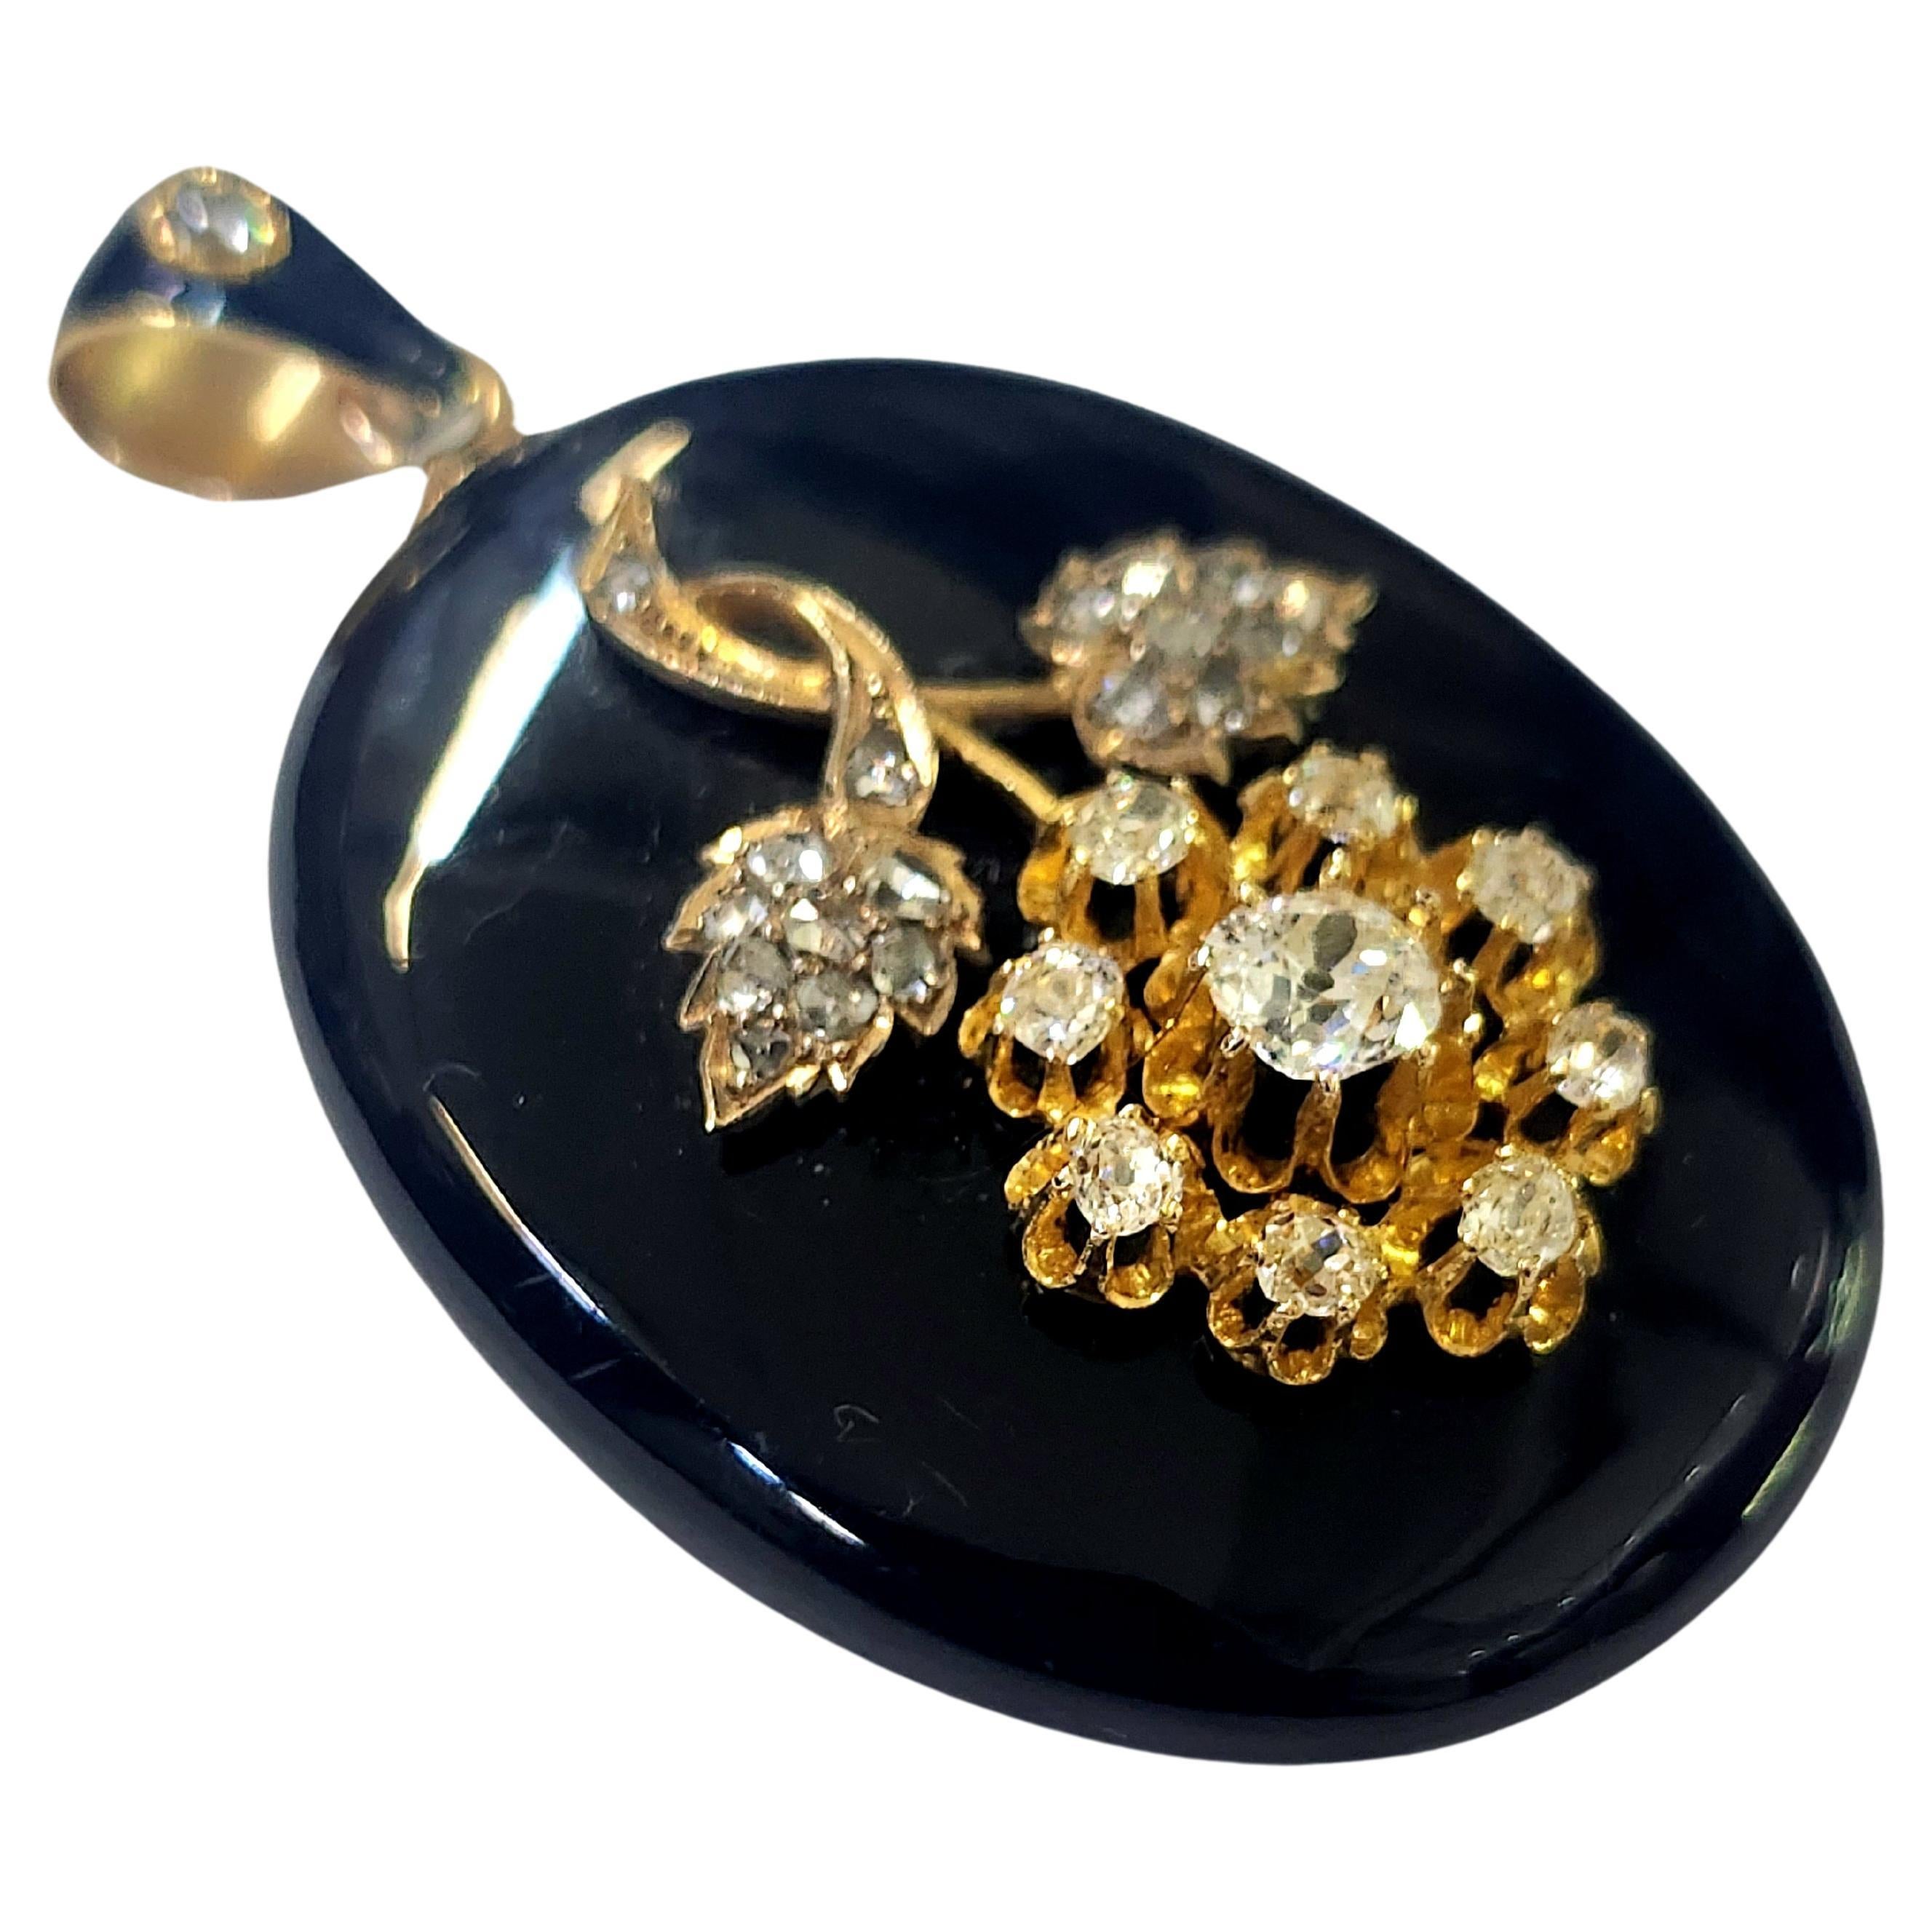 Rare antique large 14k gold pendant with black enamel in excellent condition topped with 14k gold floral centeted with old mine cut diamond estimate 1 carat flanked with old mine diamonds H color white excellent spark 